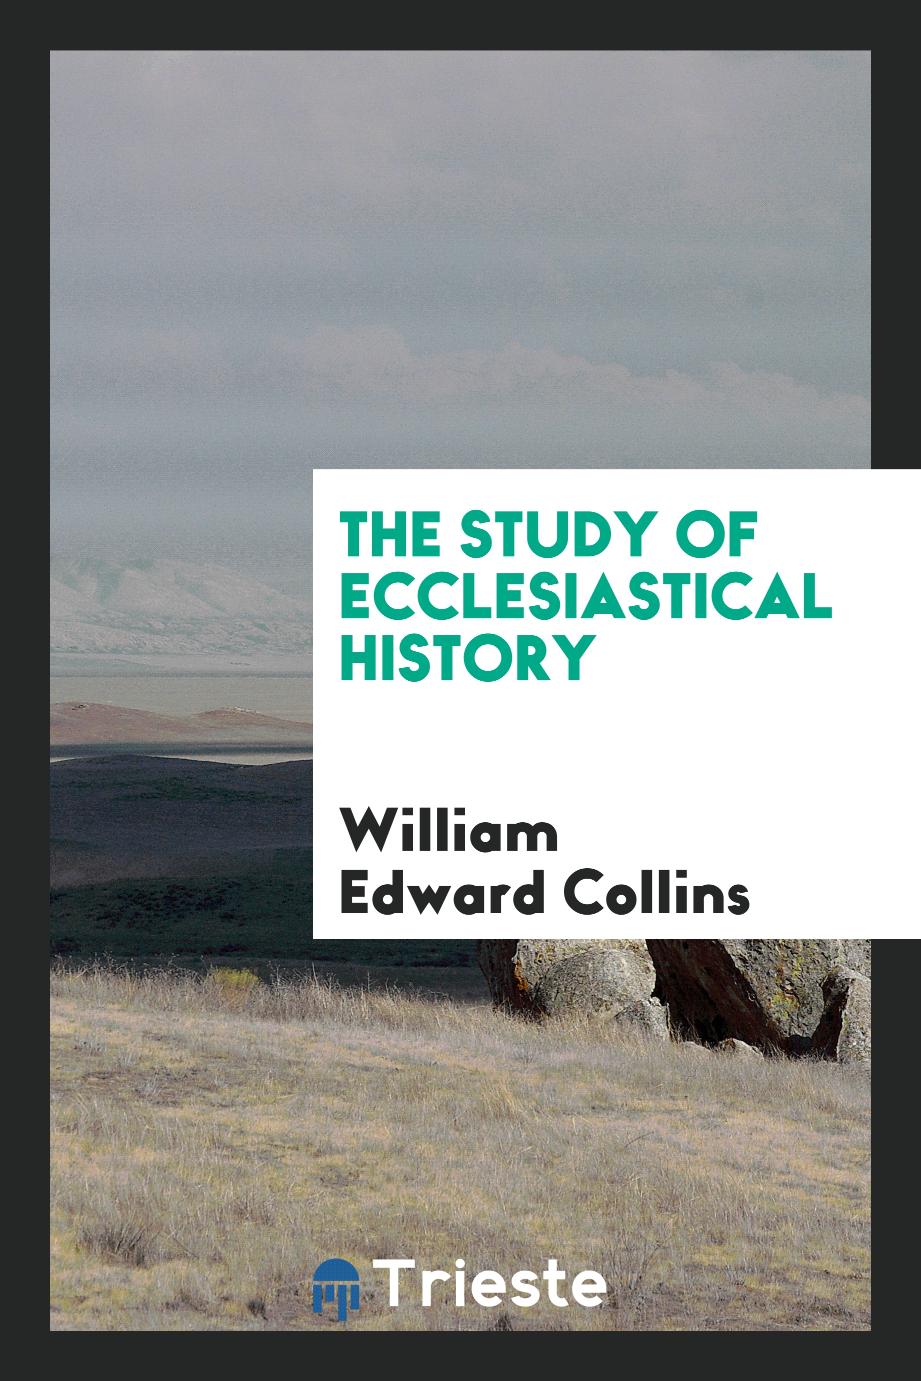 The study of Ecclesiastical history